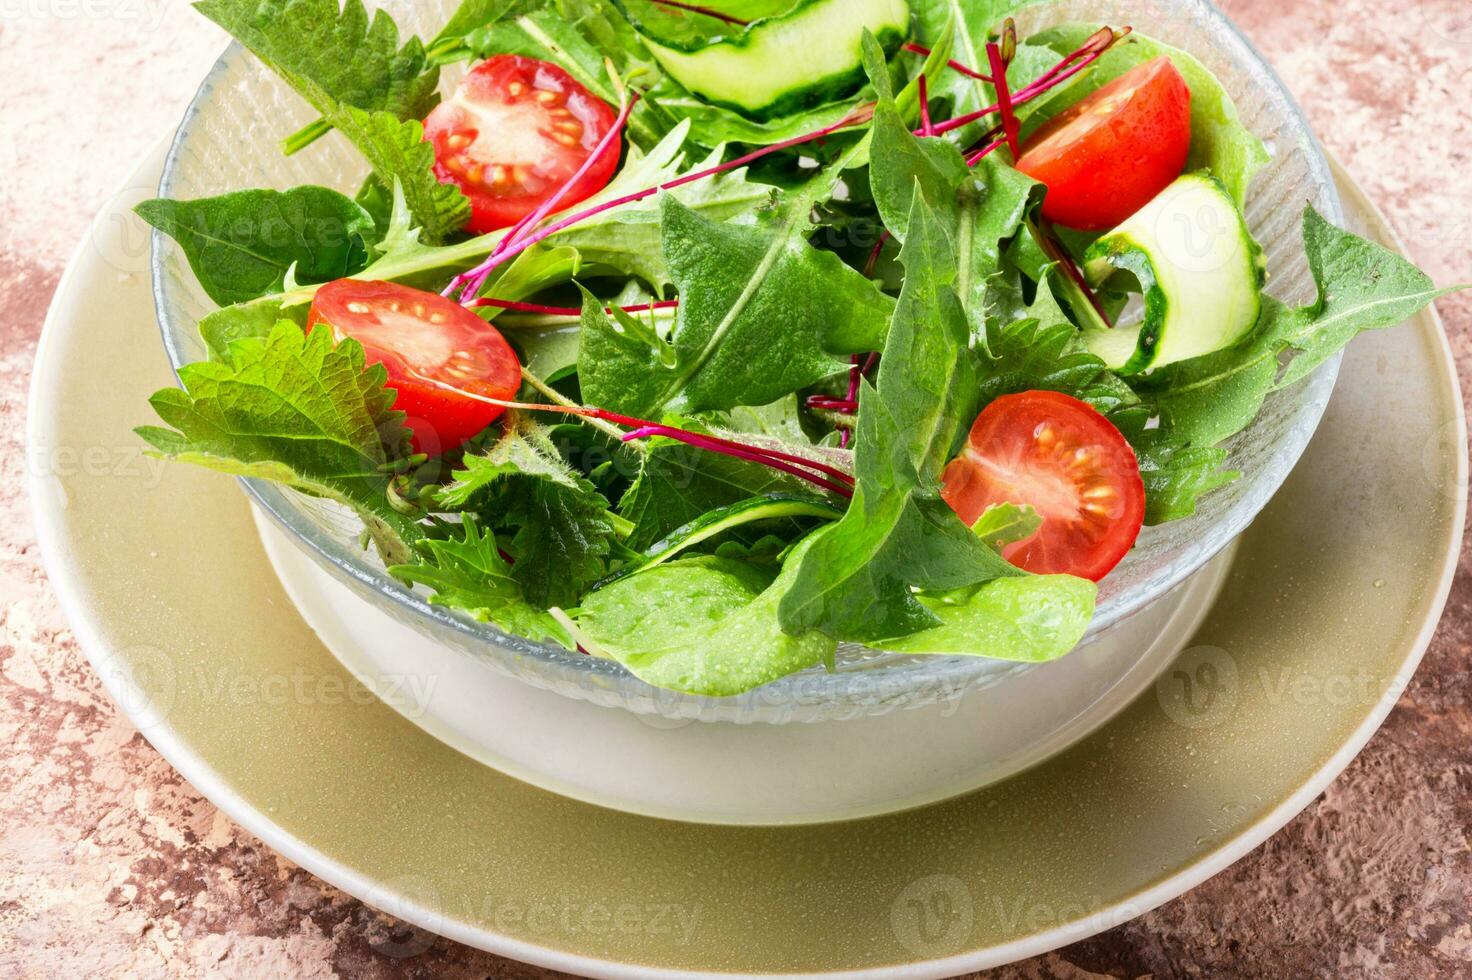 Bowl of salad with greens photo